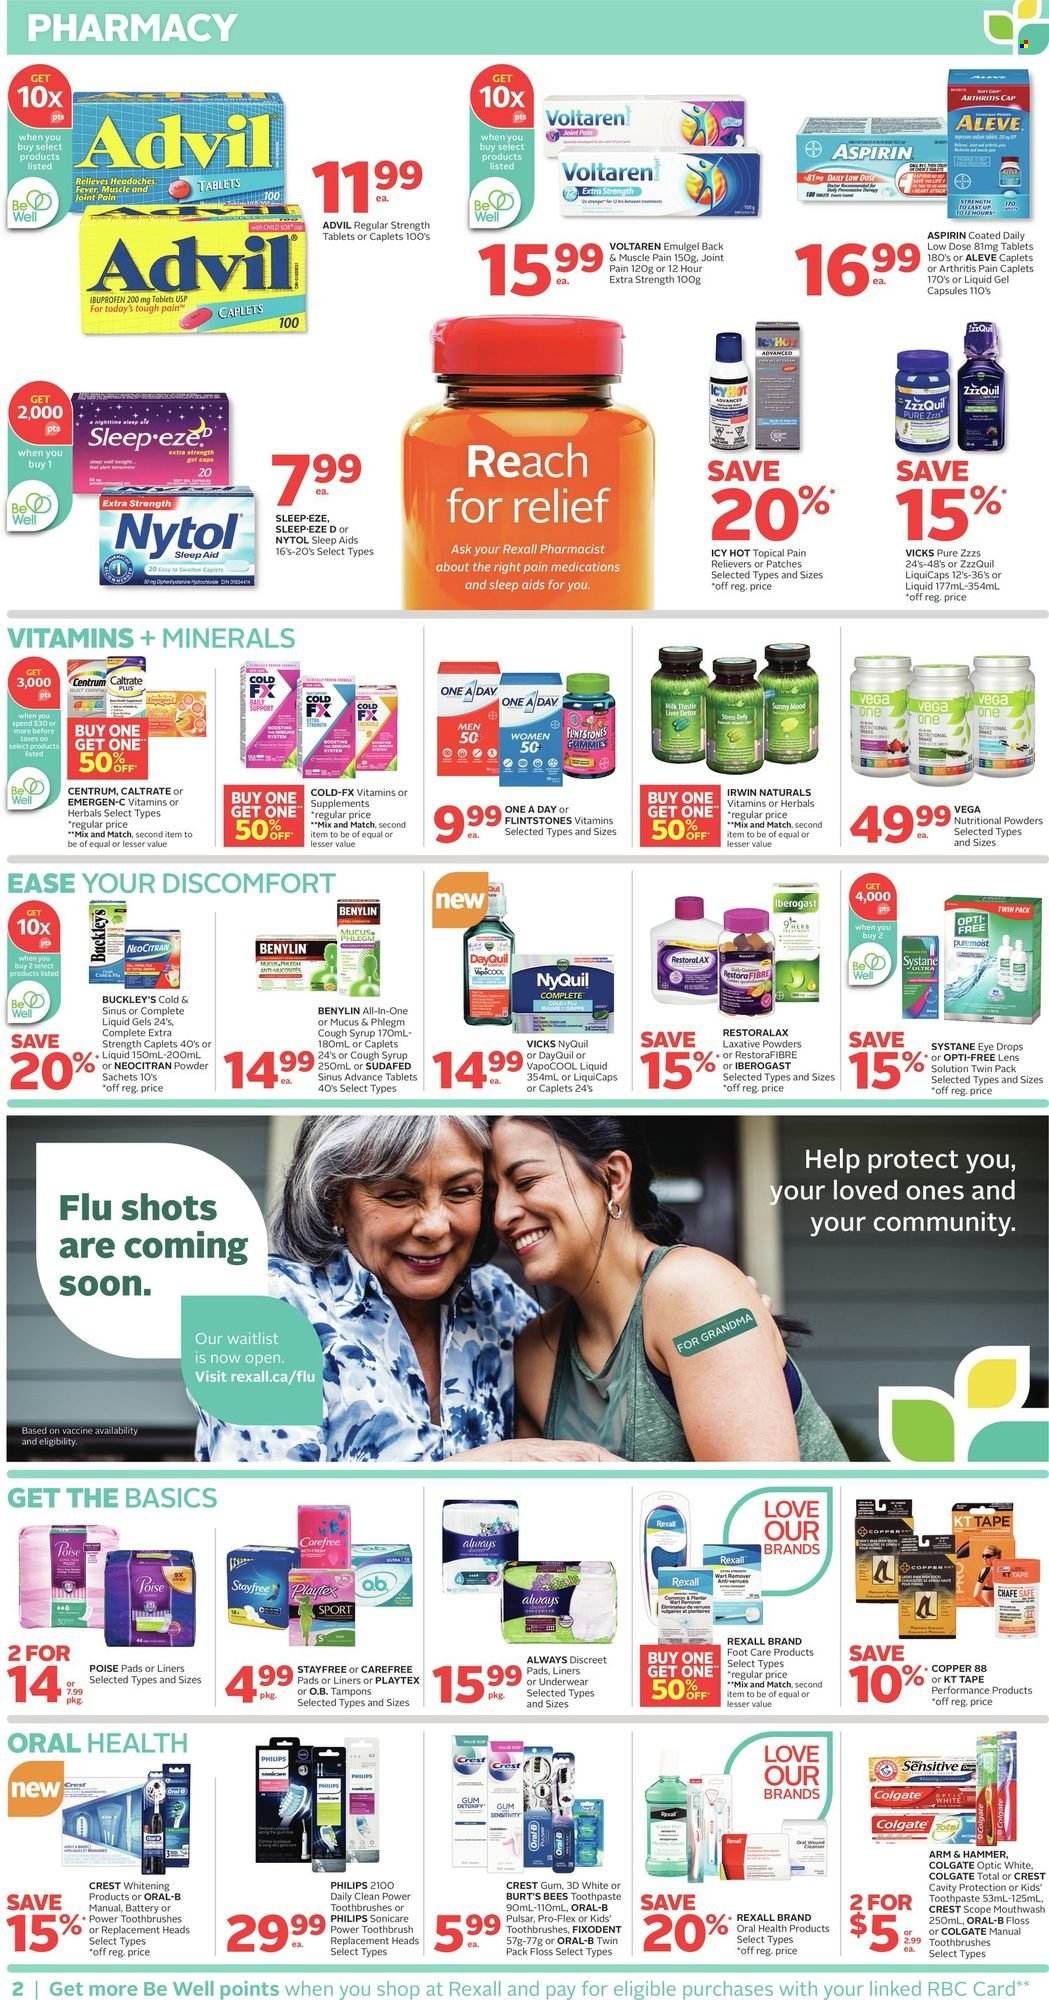 thumbnail - Rexall Flyer - October 15, 2021 - October 21, 2021 - Sales products - ARM & HAMMER, syrup, toothbrush, toothpaste, mouthwash, Fixodent, Crest, Stayfree, Playtex, sanitary pads, Always Discreet, Carefree, tampons, Vicks, foot care, Aleve, DayQuil, ZzzQuil, Ibuprofen, NyQuil, eye drops, Advil Rapid, Emergen-C, laxative, Low Dose, aspirin, Centrum, Benylin, Colgate, Systane, Oral-B. Page 2.